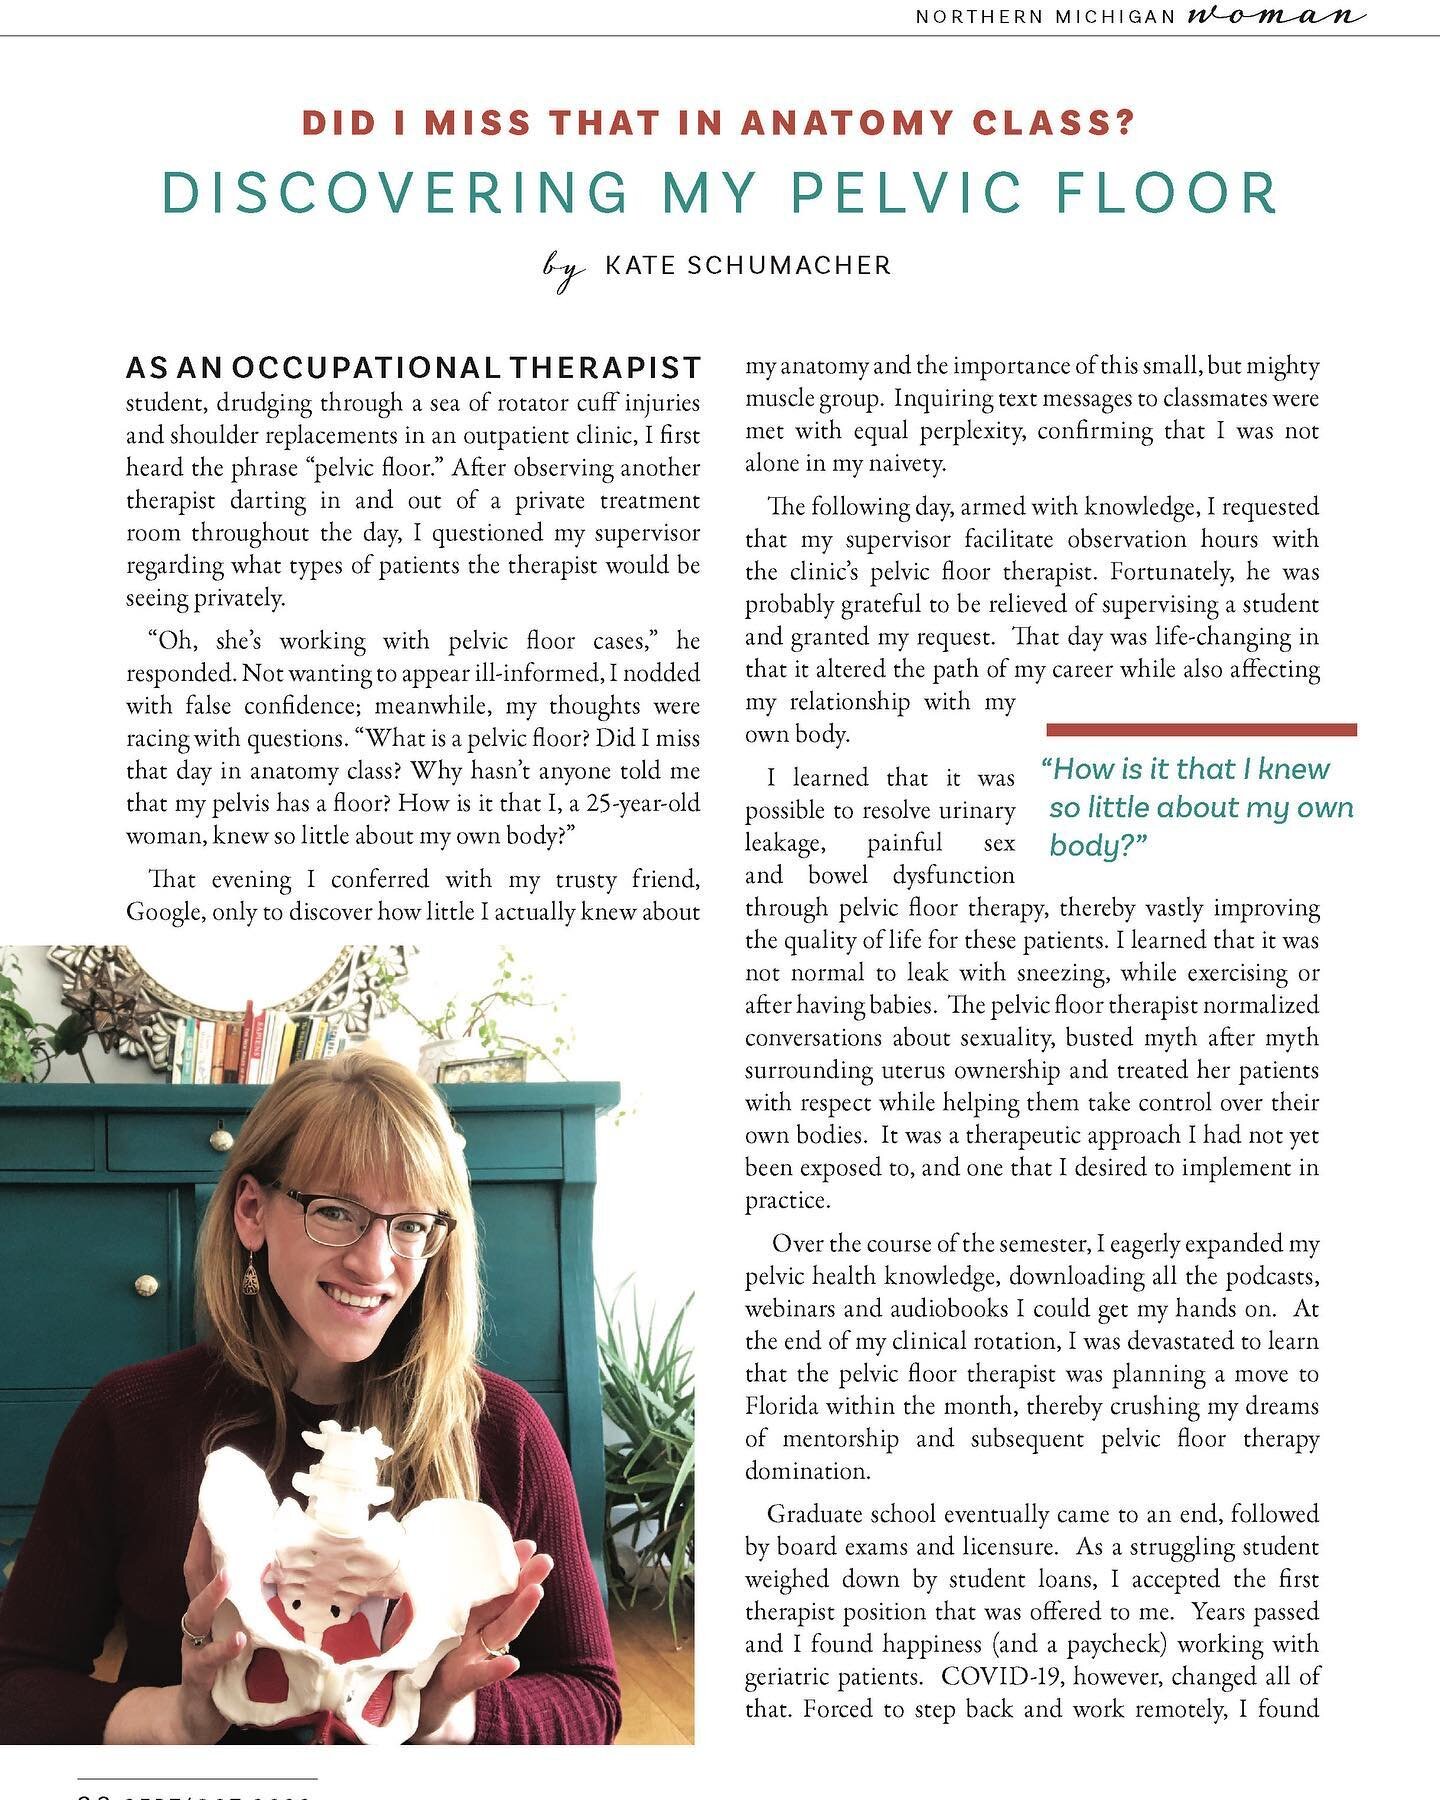 So honored that my story was featured in Northern Michigan Woman Magazine. Go pick up a copy (it&rsquo;s free!) or check out the digital version tonight! 

@northernmichiganwoman 

#pelvicfloorot #themoreyouknow🌈 #vulvalove #pregnancylife #pelvichea